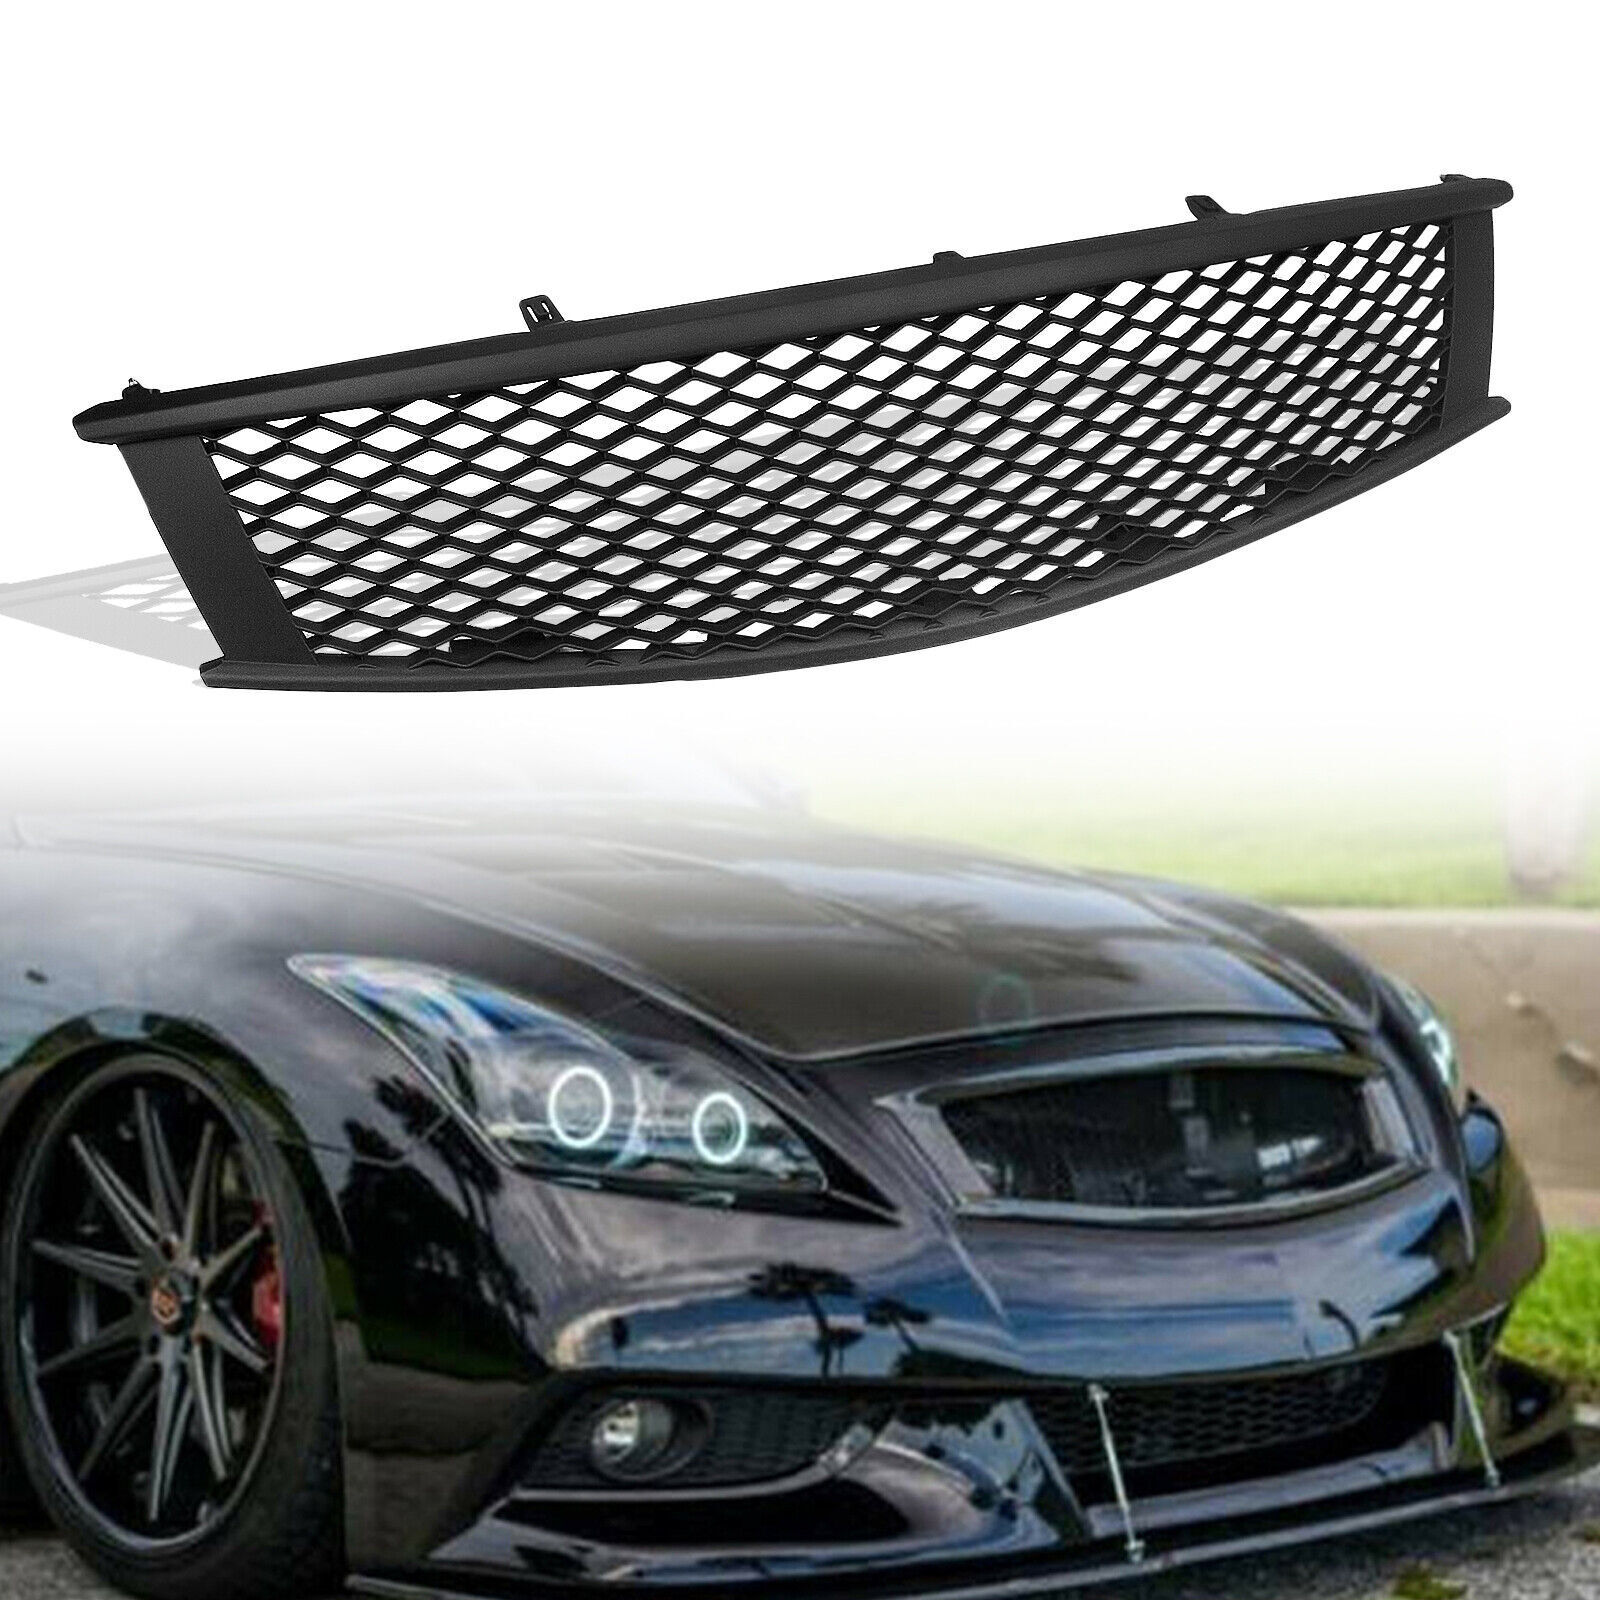 Matte Black Front Grille Mesh For 2008-2013 09 Infiniti G37 Coupe 2014-2015 Q60